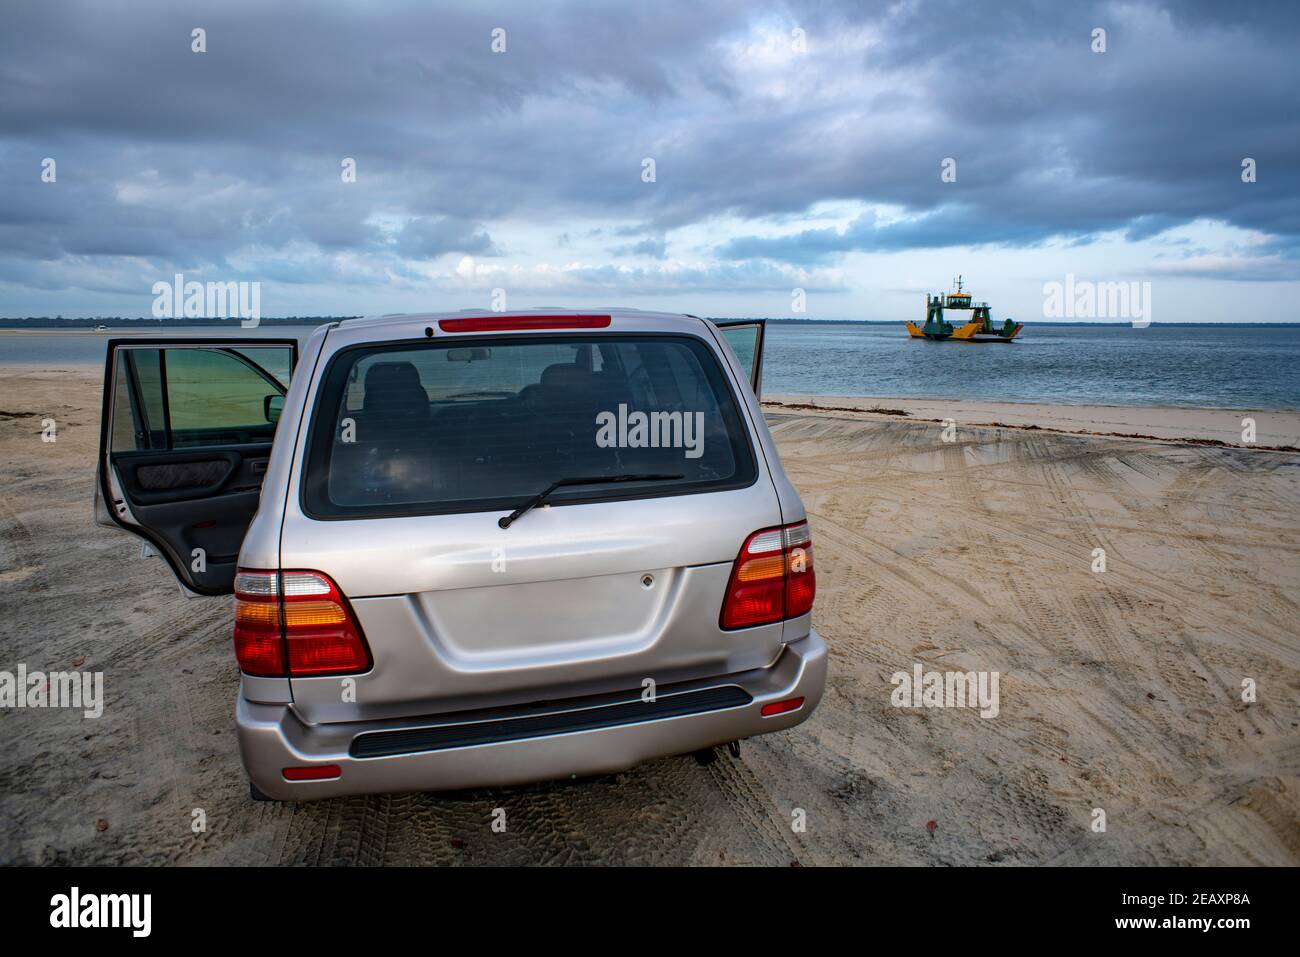 Fraser Island Australia - December 2019: Ferry Crossing 4WD Fraser Island, Driving on Beaches of Fraser Island Great Sandy National Park, Queensland A Stock Photo